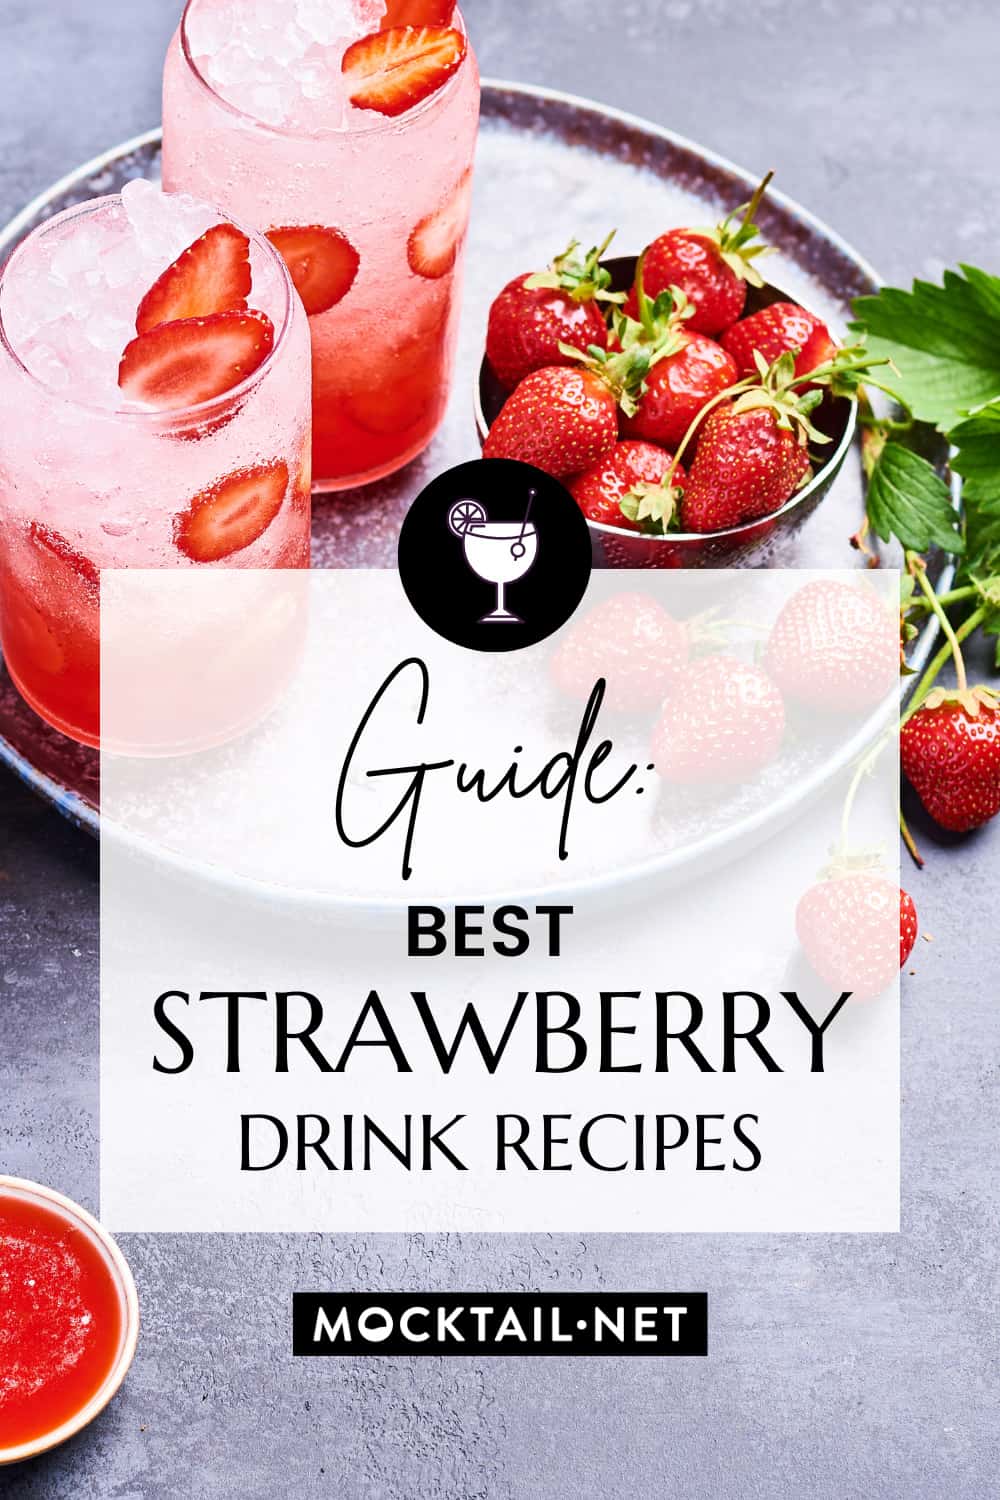 Guide: Best Strawberry Drink Recipes